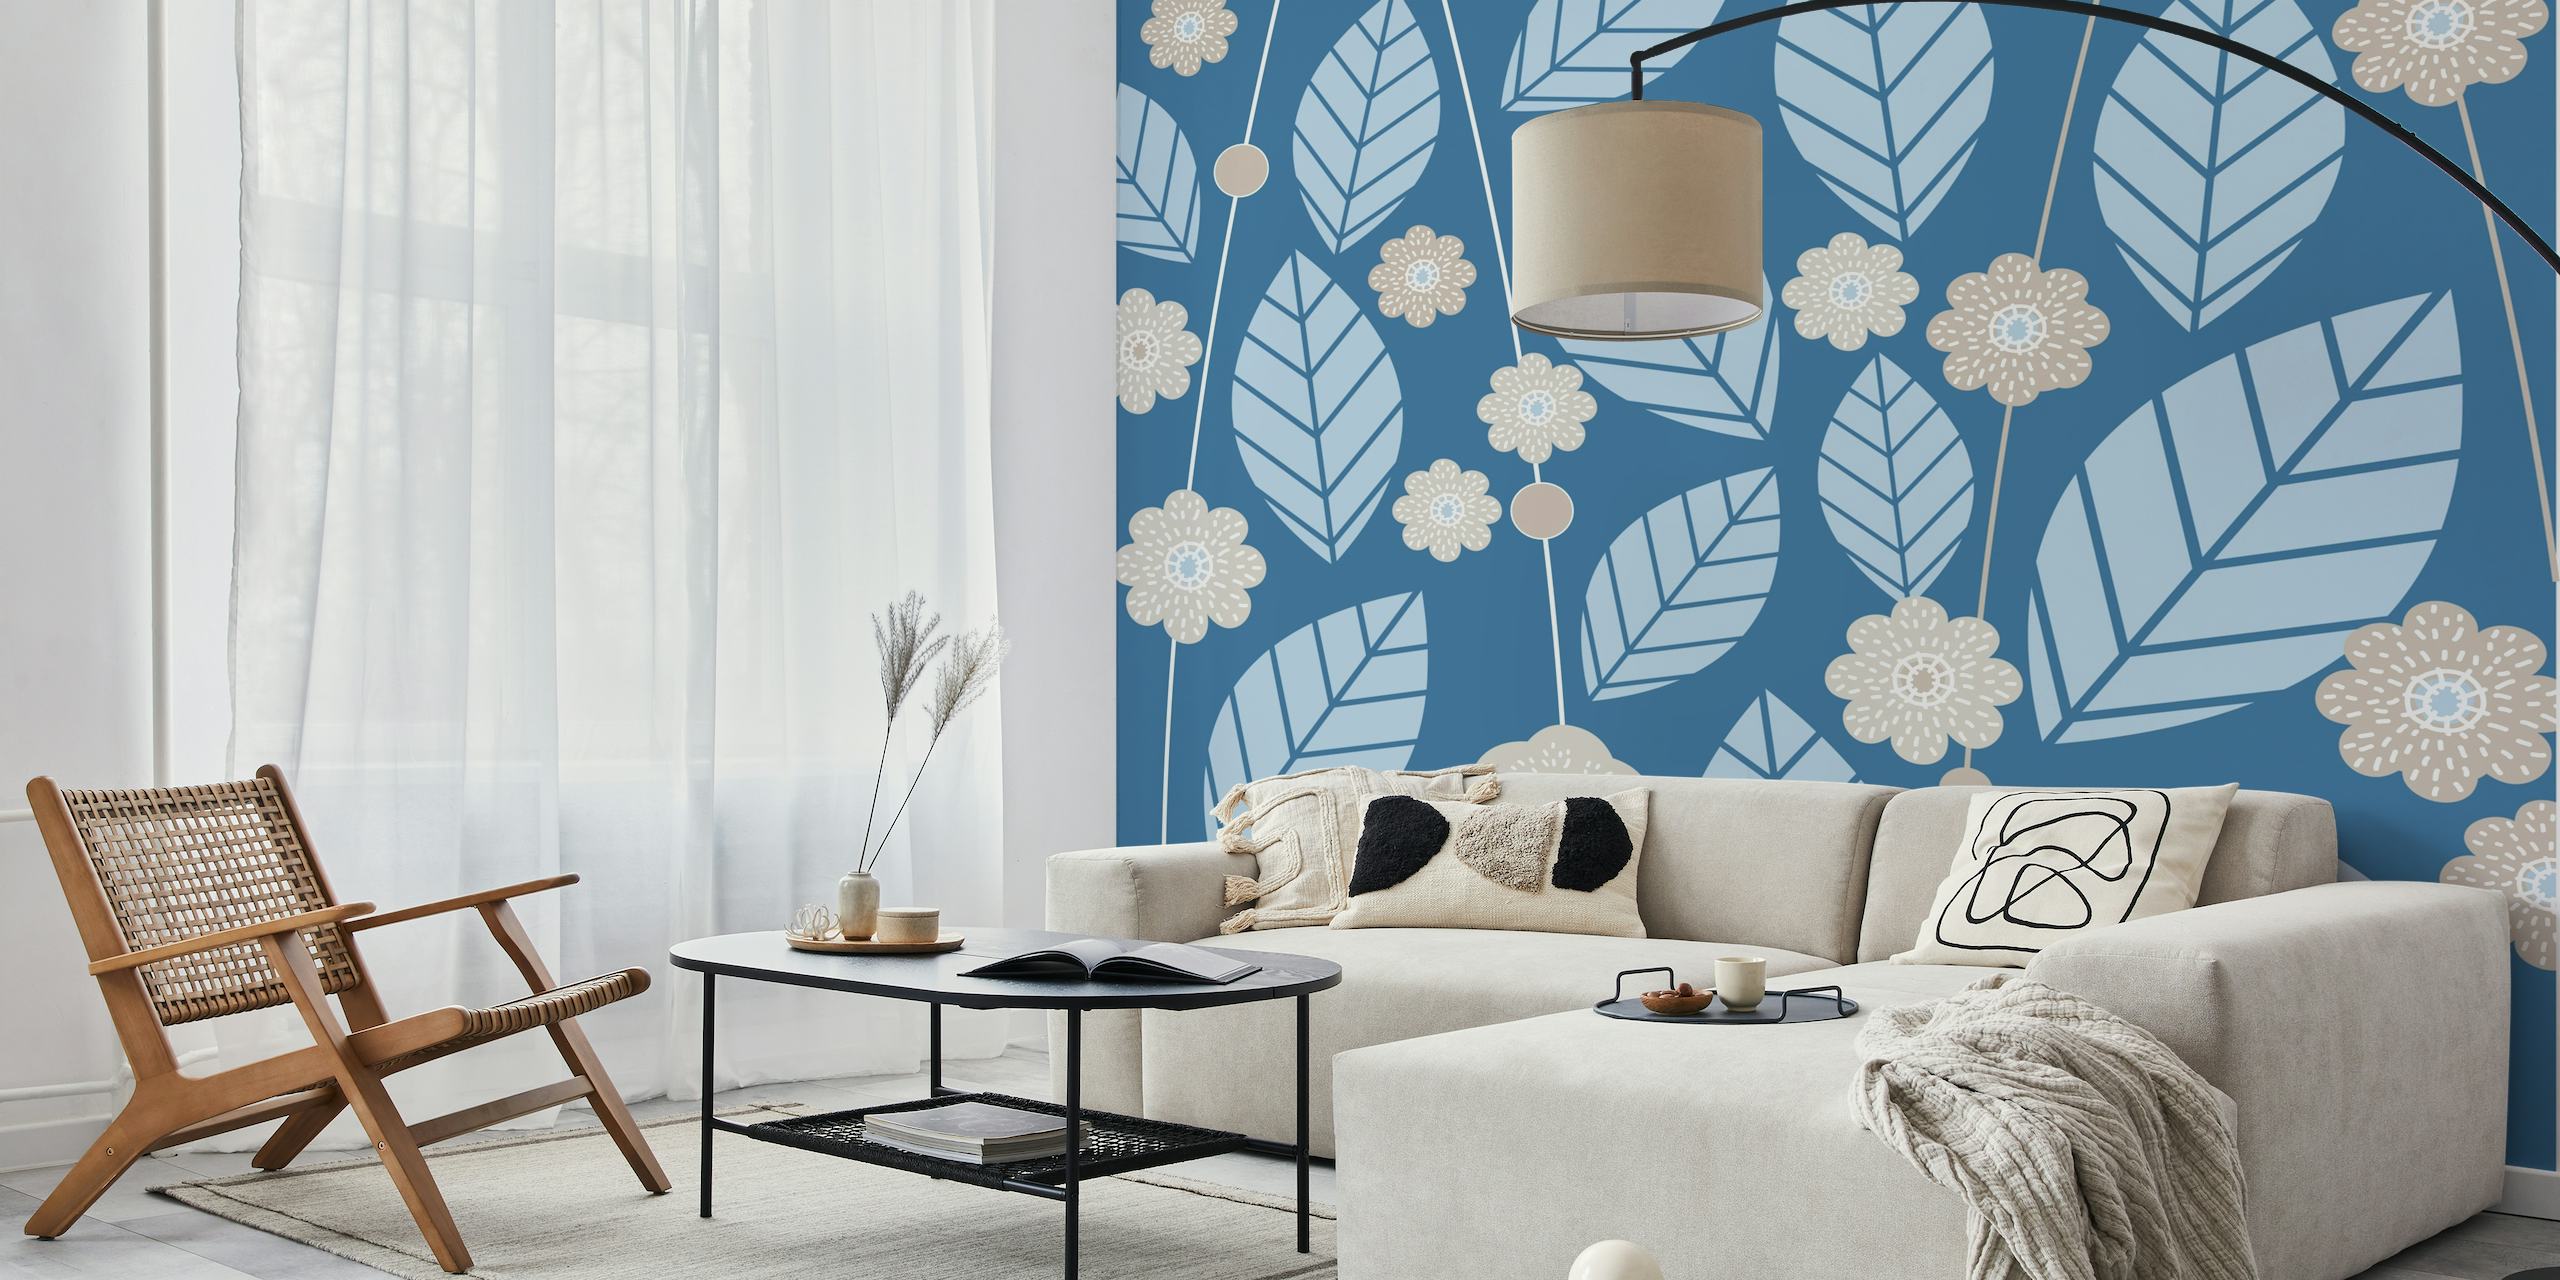 Wall mural with a blue pastel leaves and white flowers pattern on a blue background